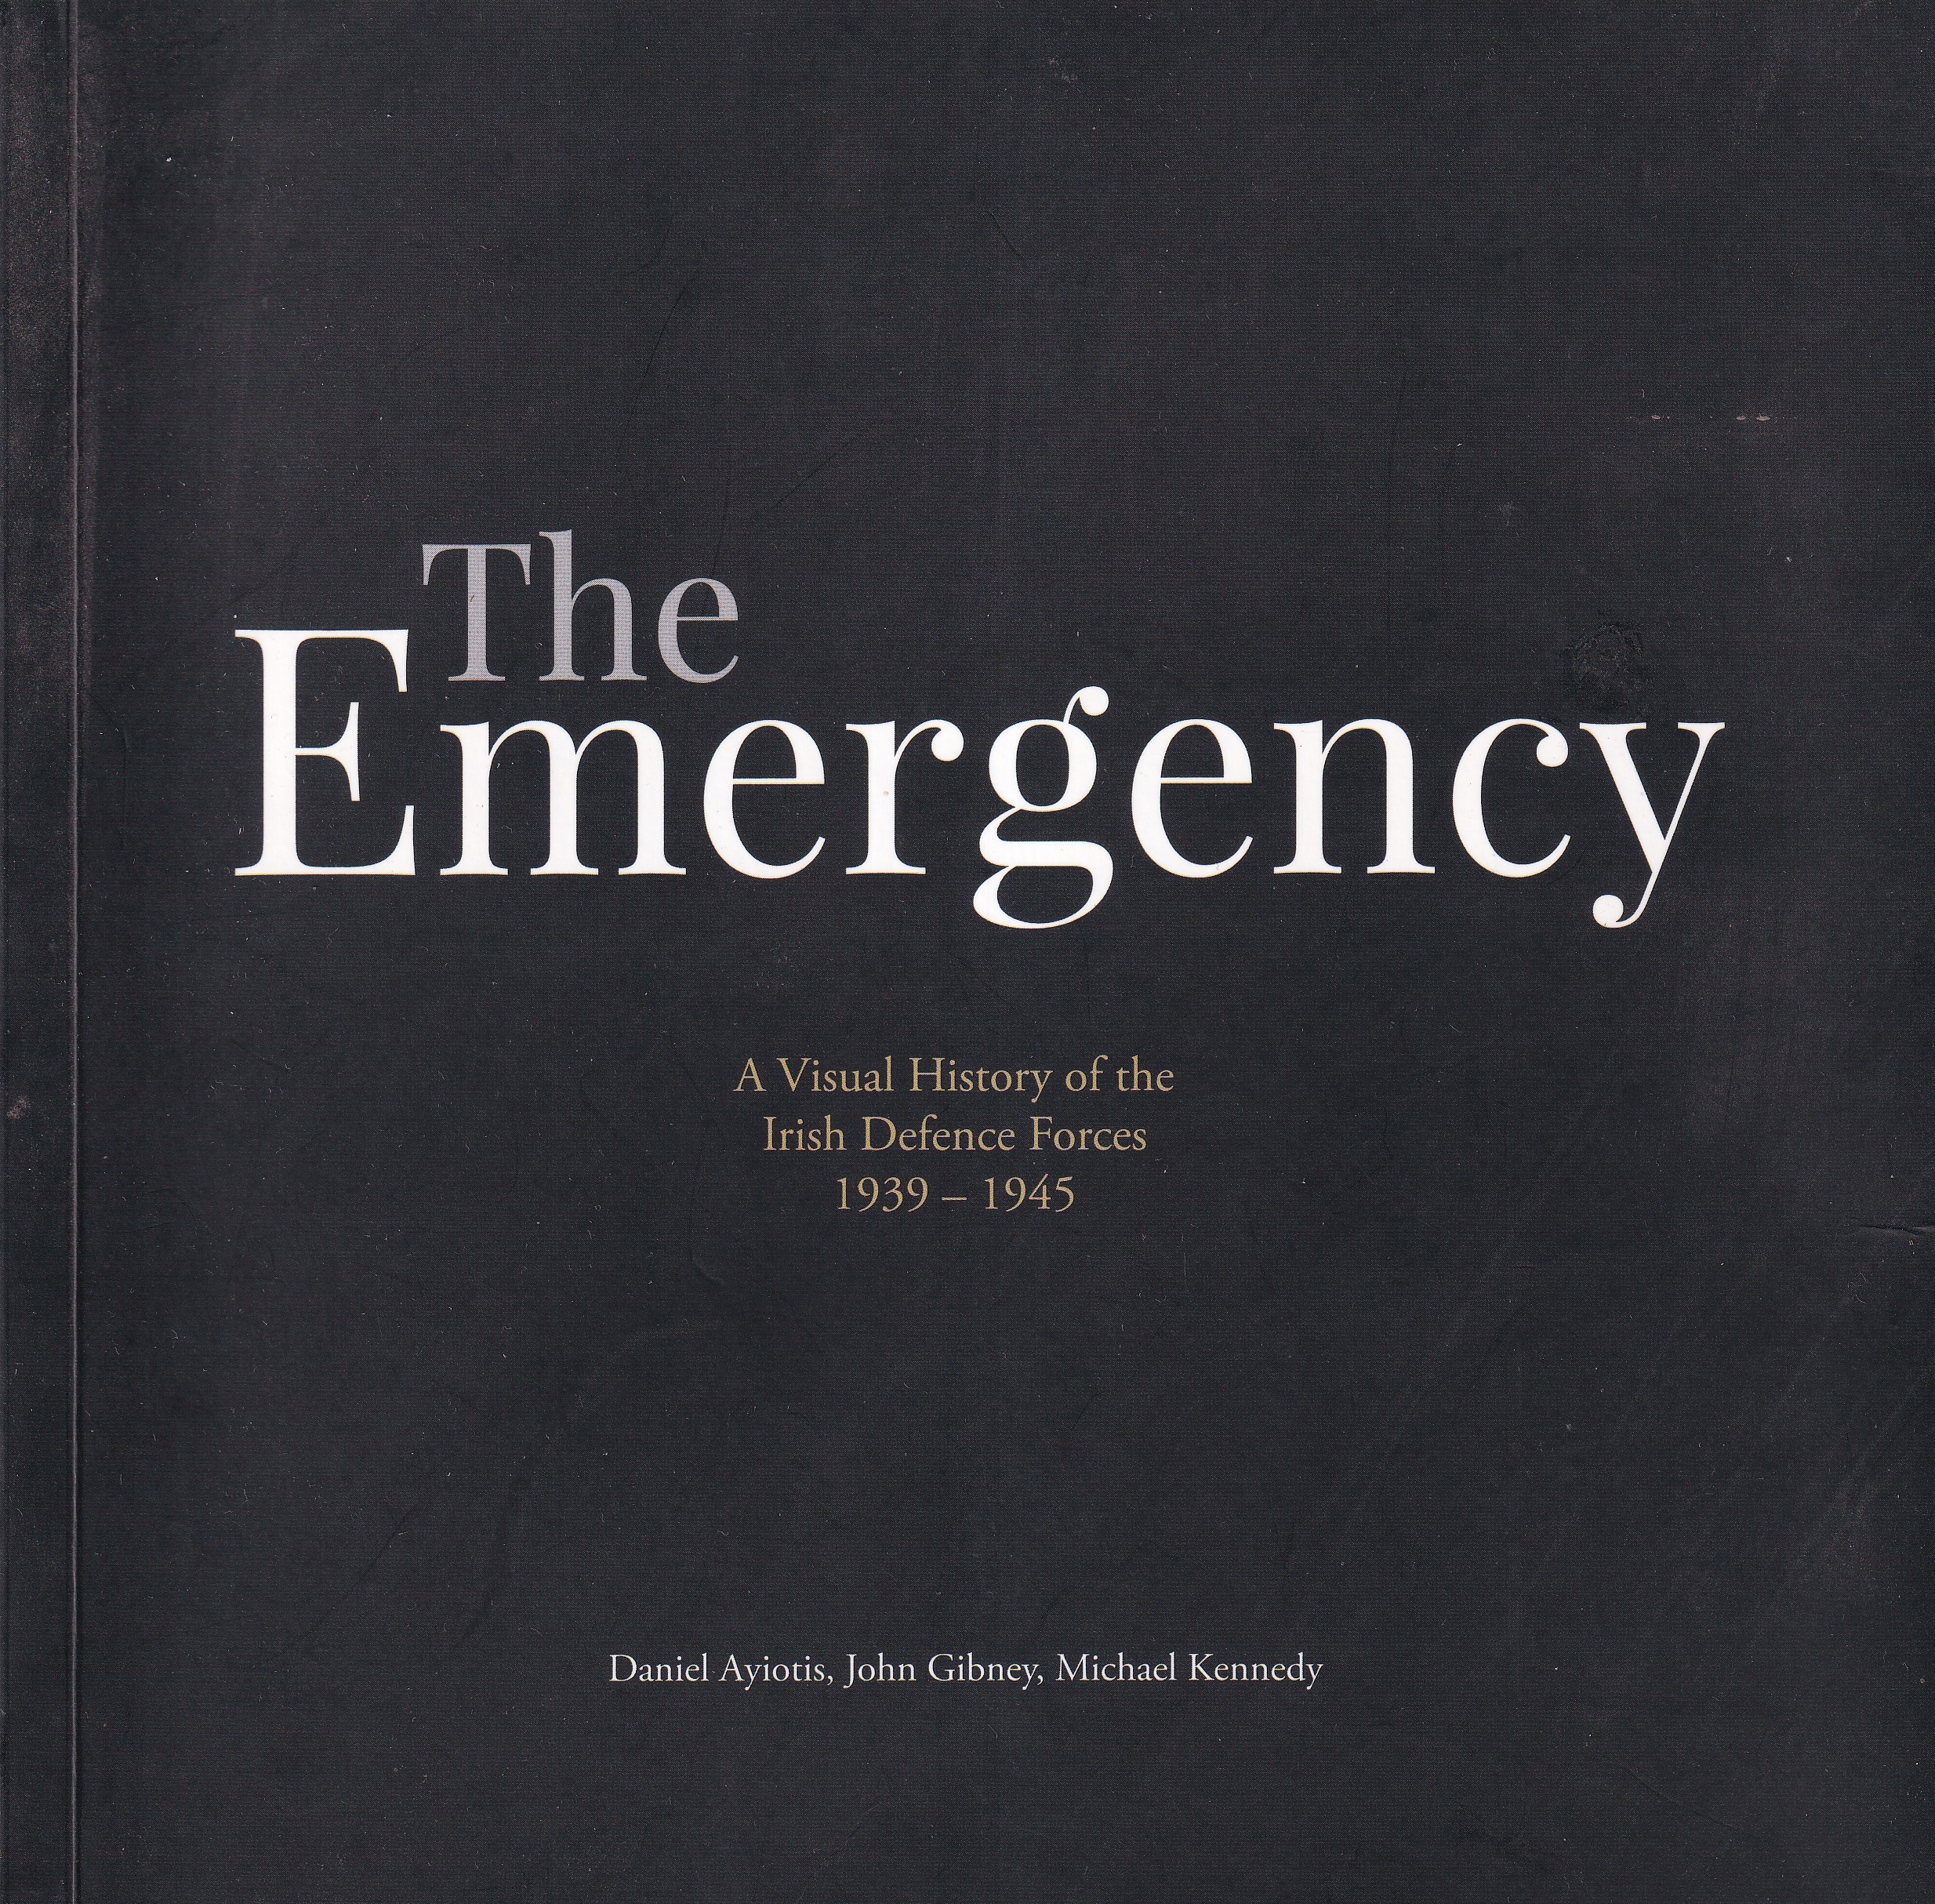 The Emergency: A Visual History of the Irish Defence Forces 1939-1945 | Daniel Ayiotis, John Gibney and Michael Kennedy | Charlie Byrne's